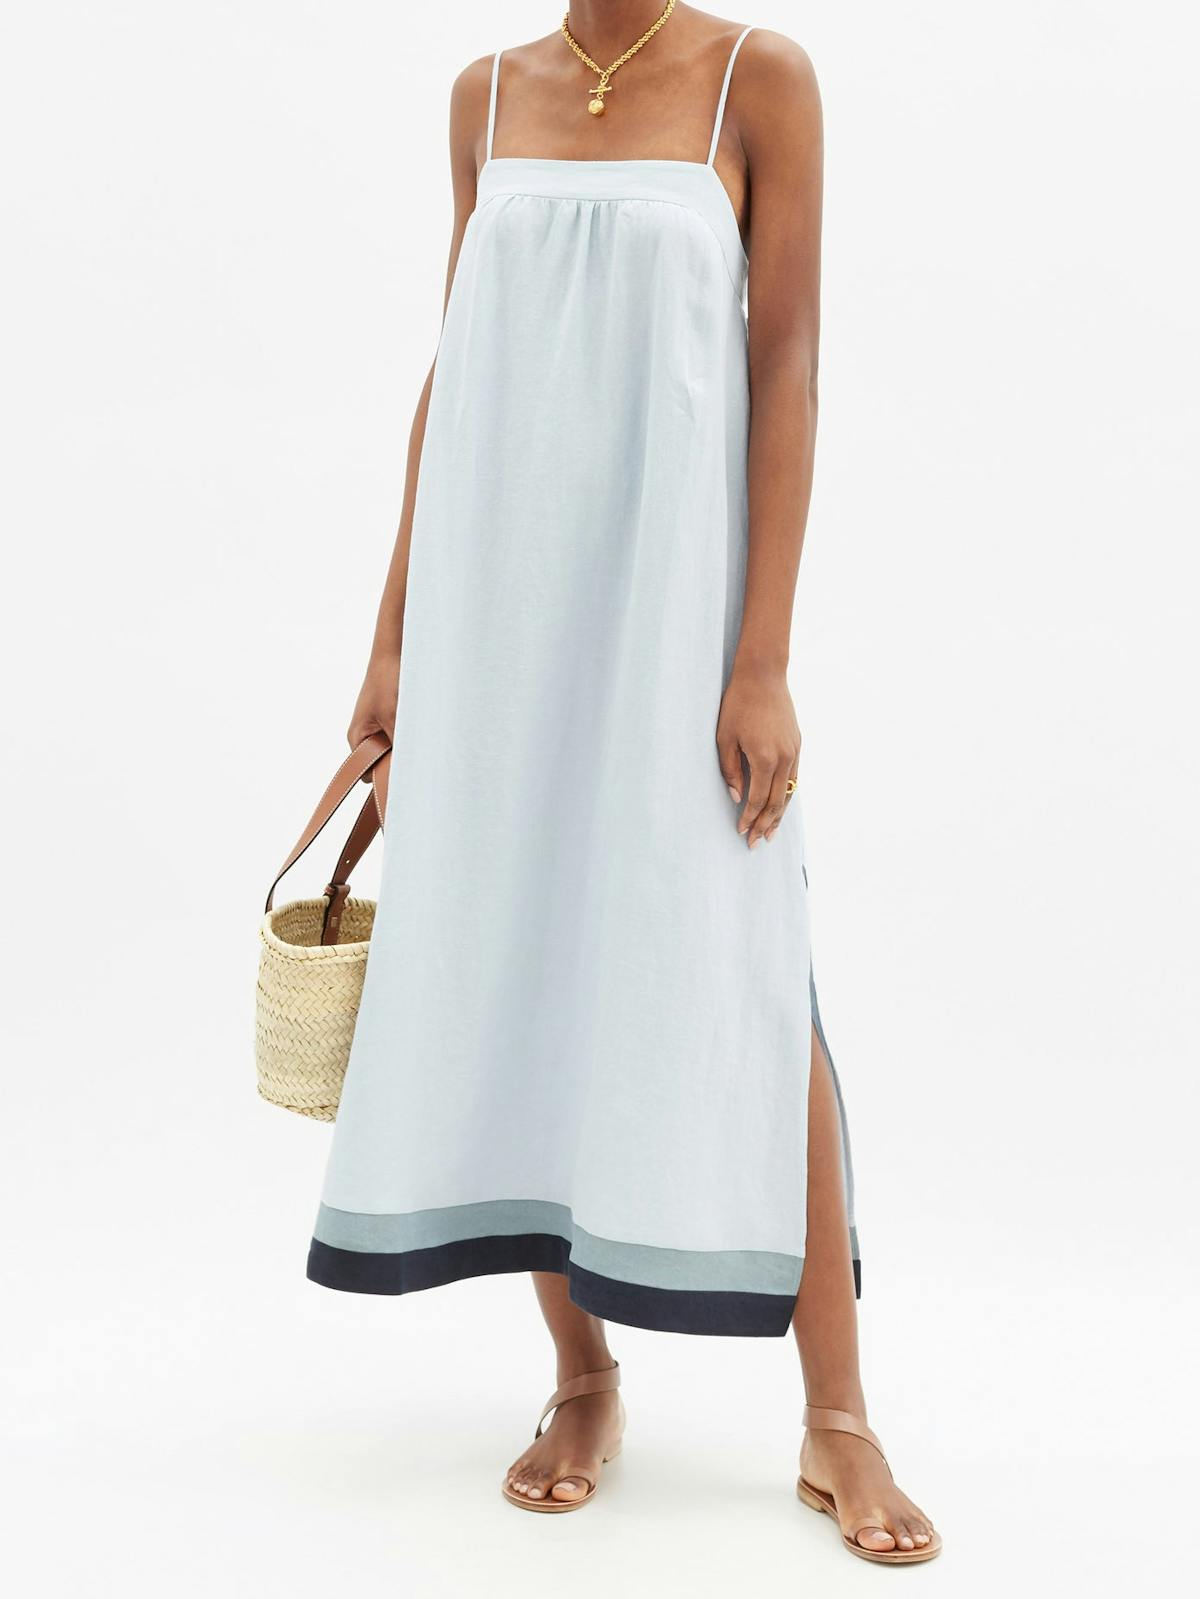 13 pale blue dresses to wear for spring/summer